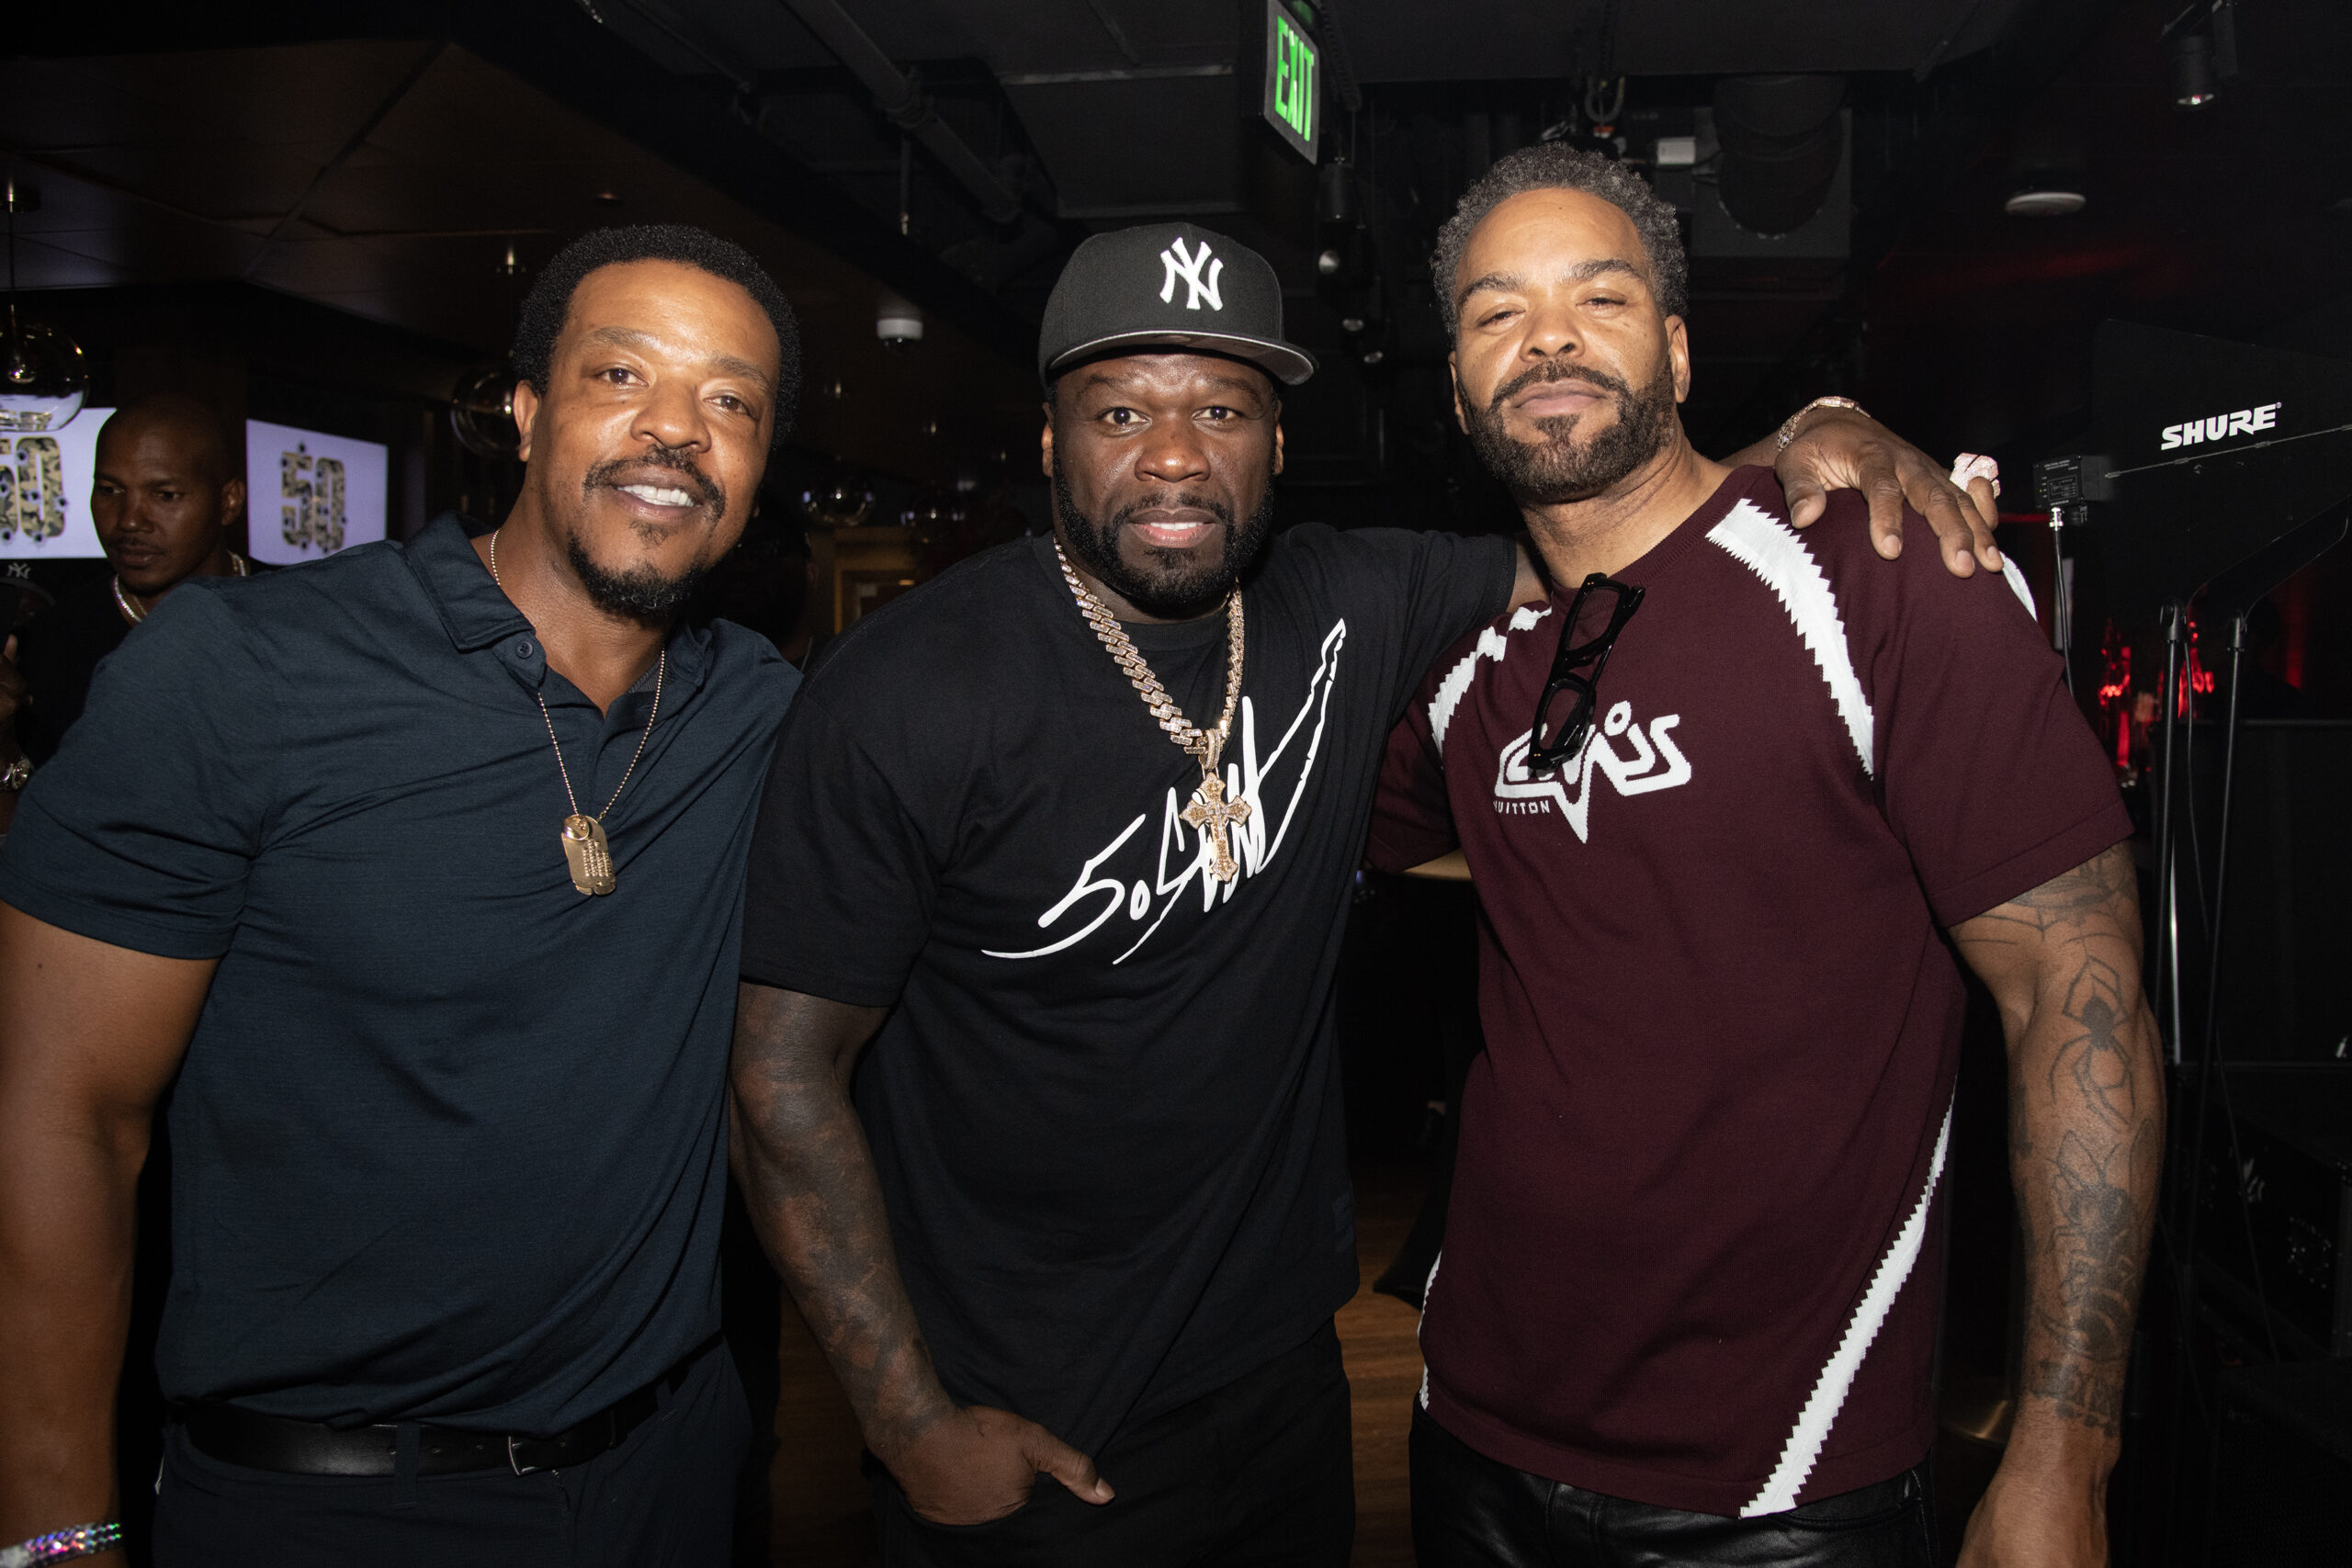 50 Cent Brings Method Man & Other "Power" Stars To Denver For "Final